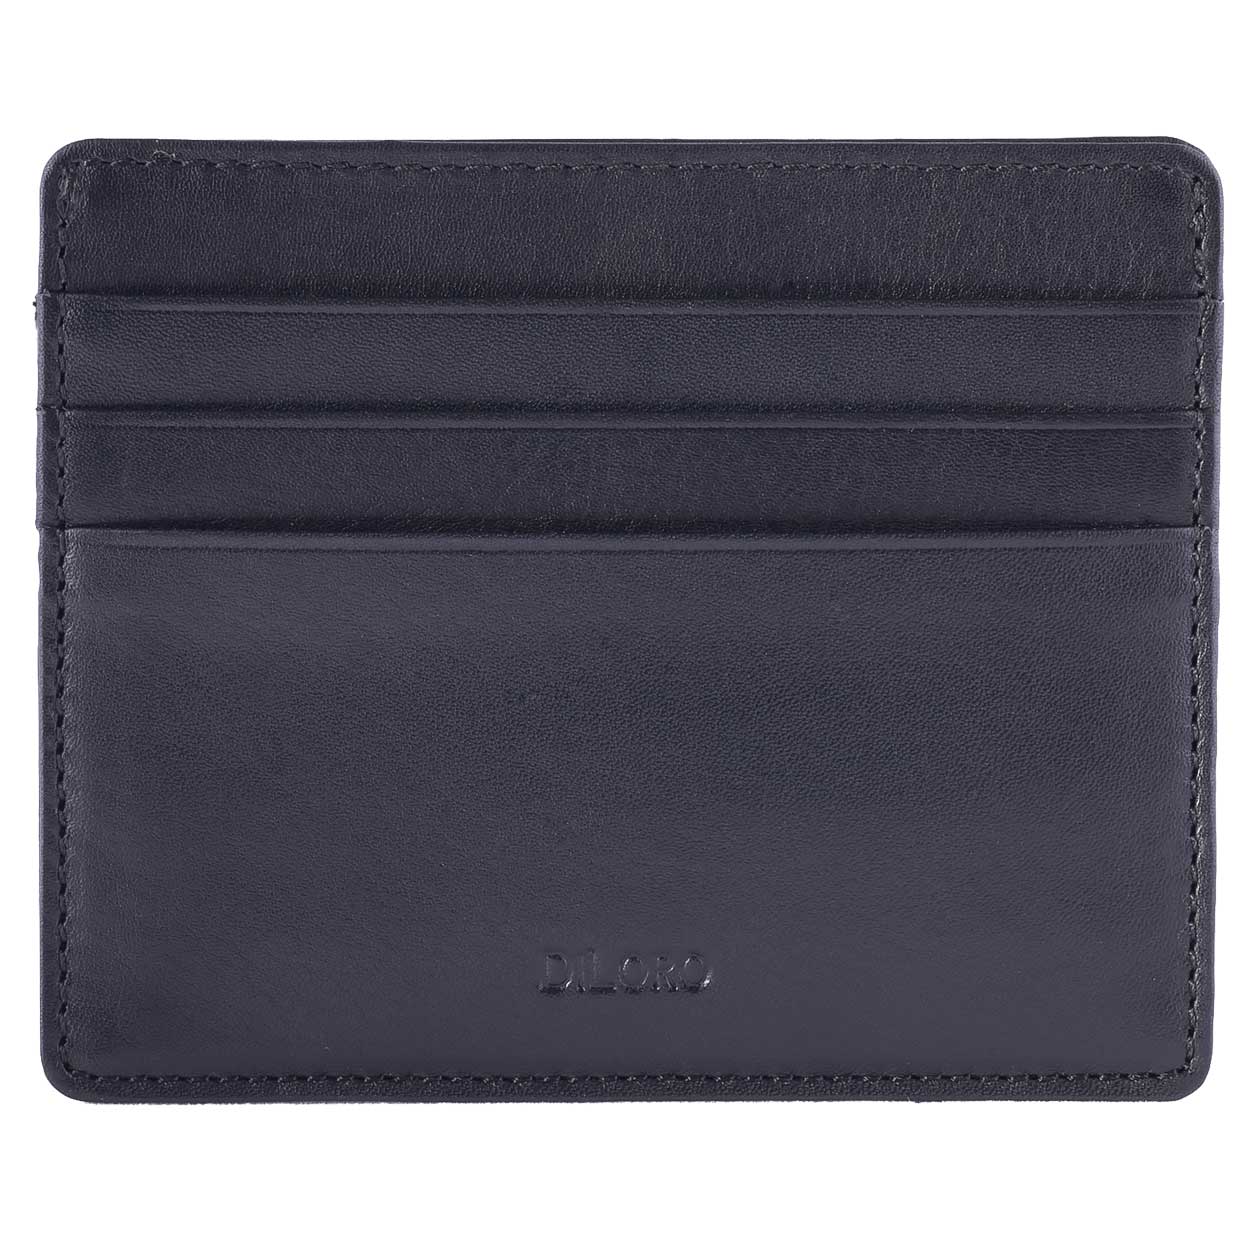 Ultra Slim Mens Leather Credit Card Holder Wallet - DiLoro Leather